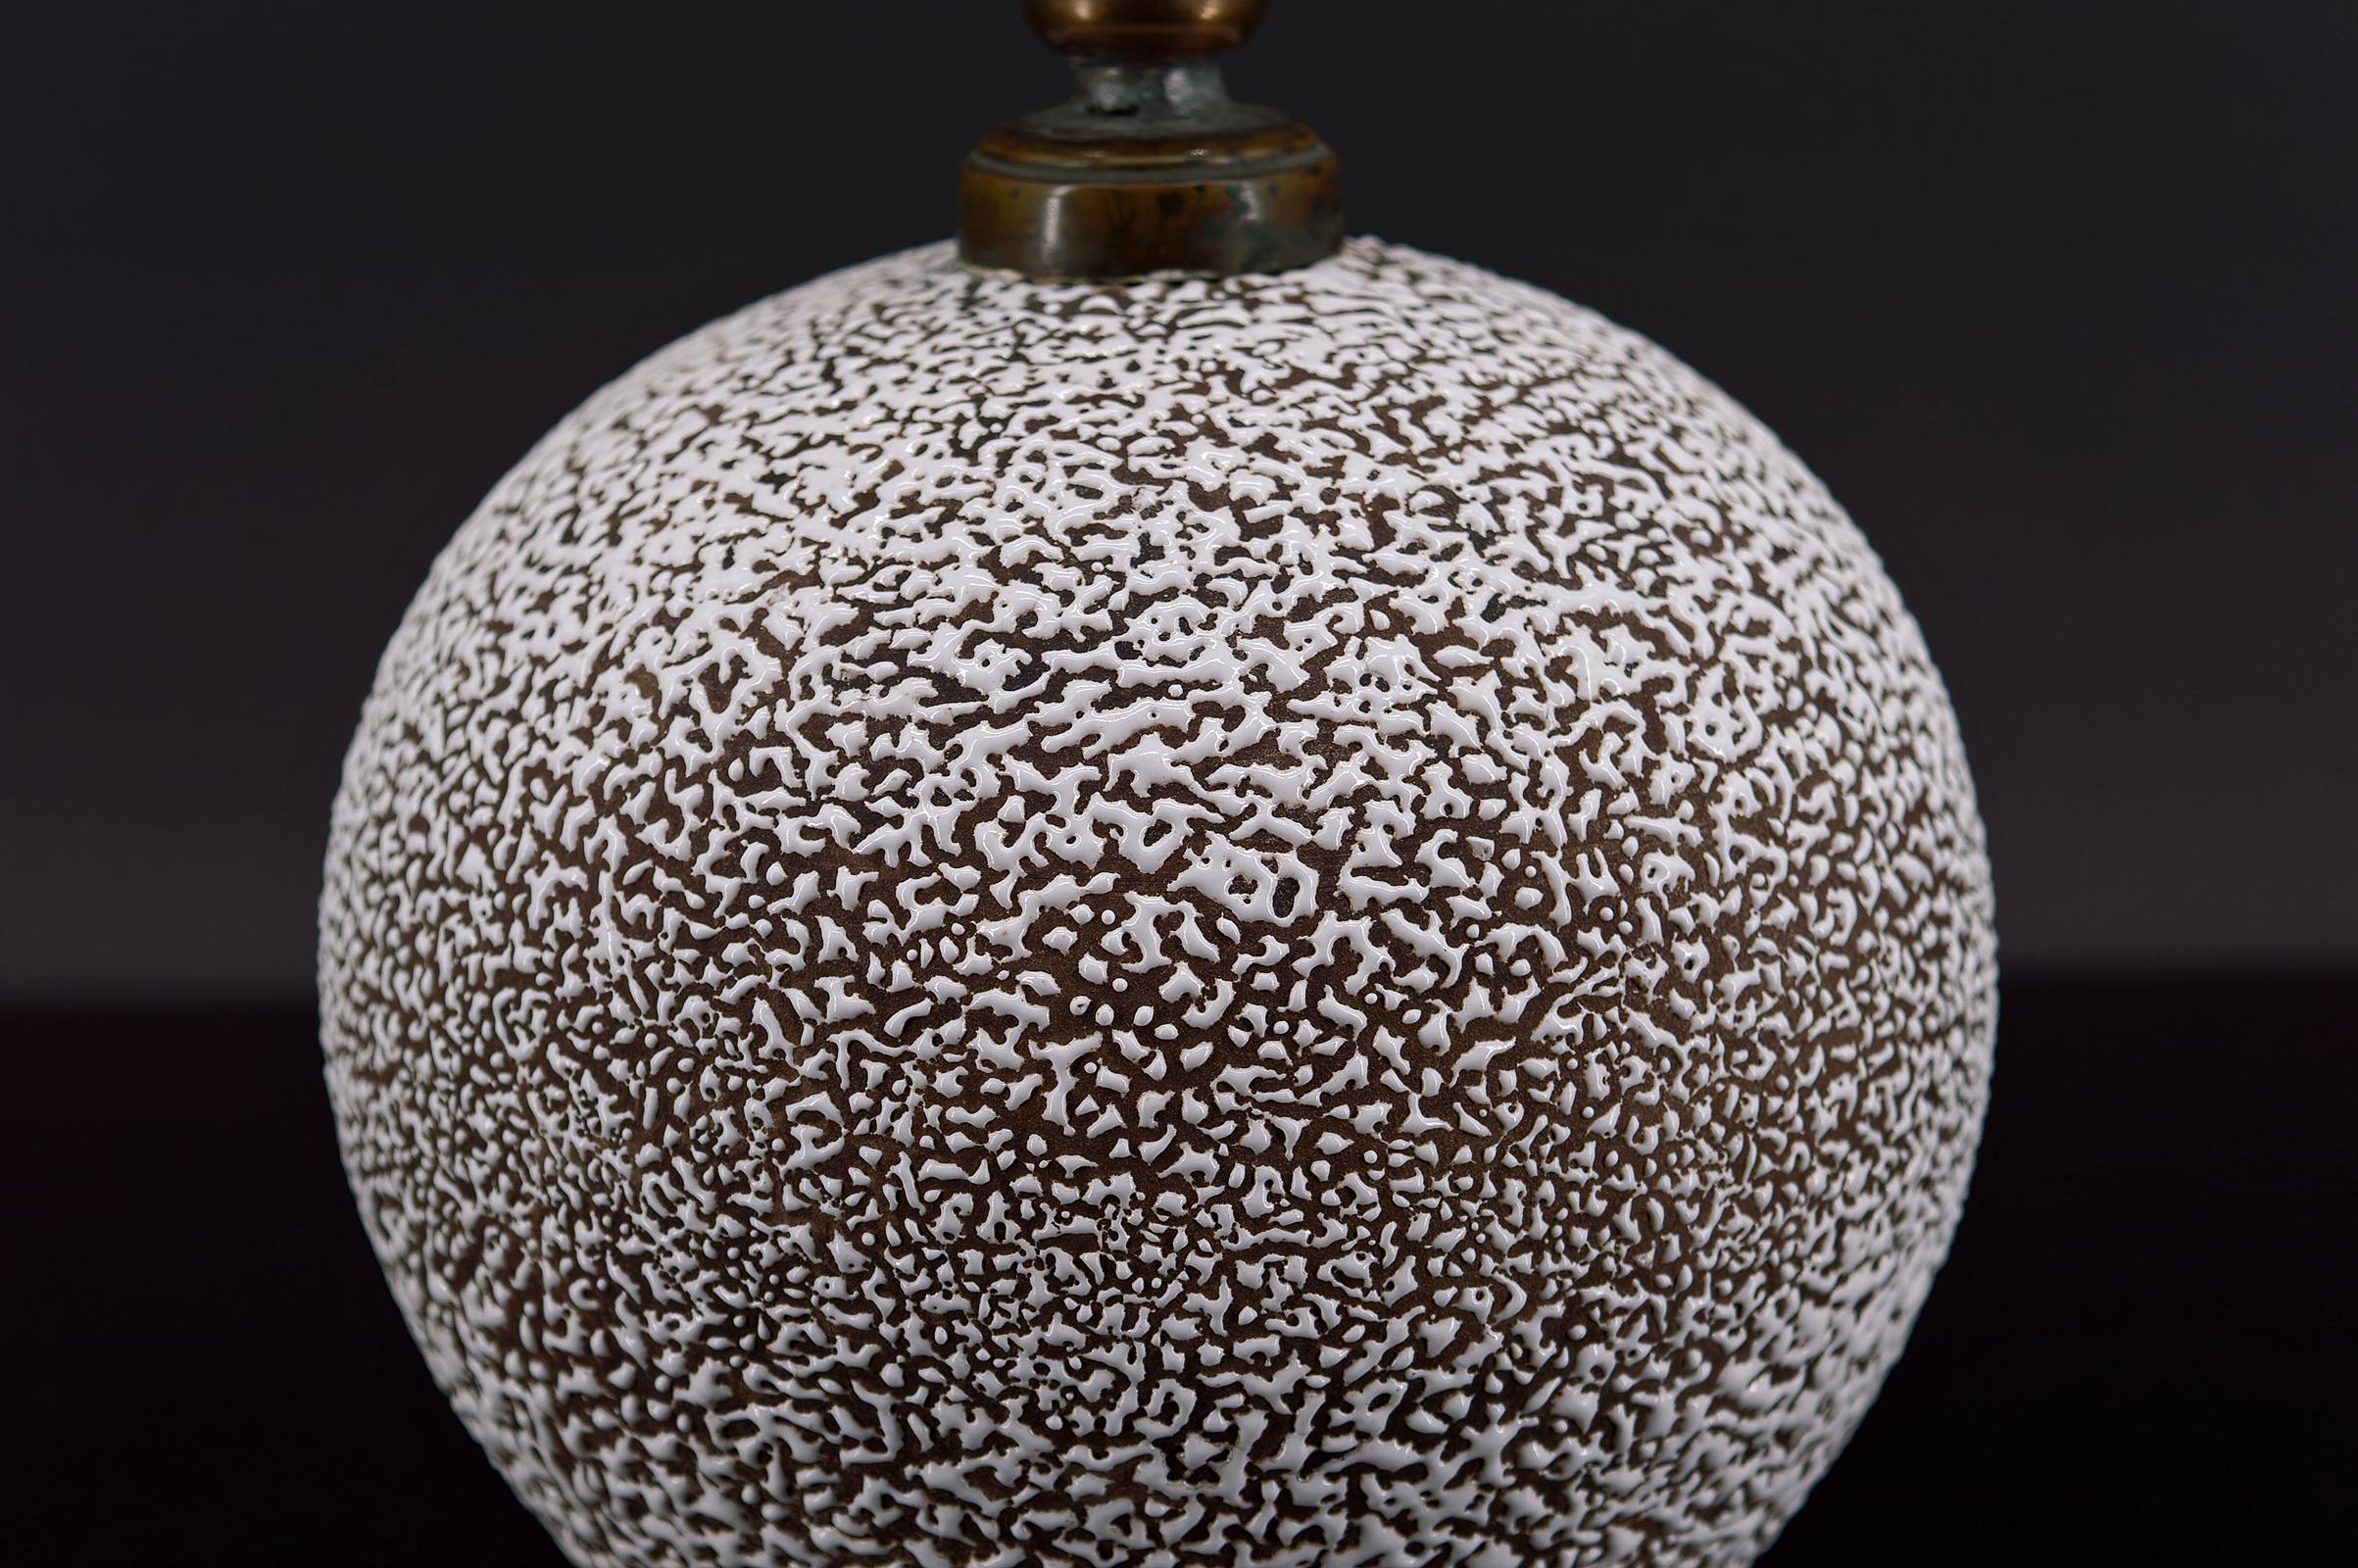 Mid-20th Century Besnard-style White and Brown Ceramic Lamp, France, circa 1930